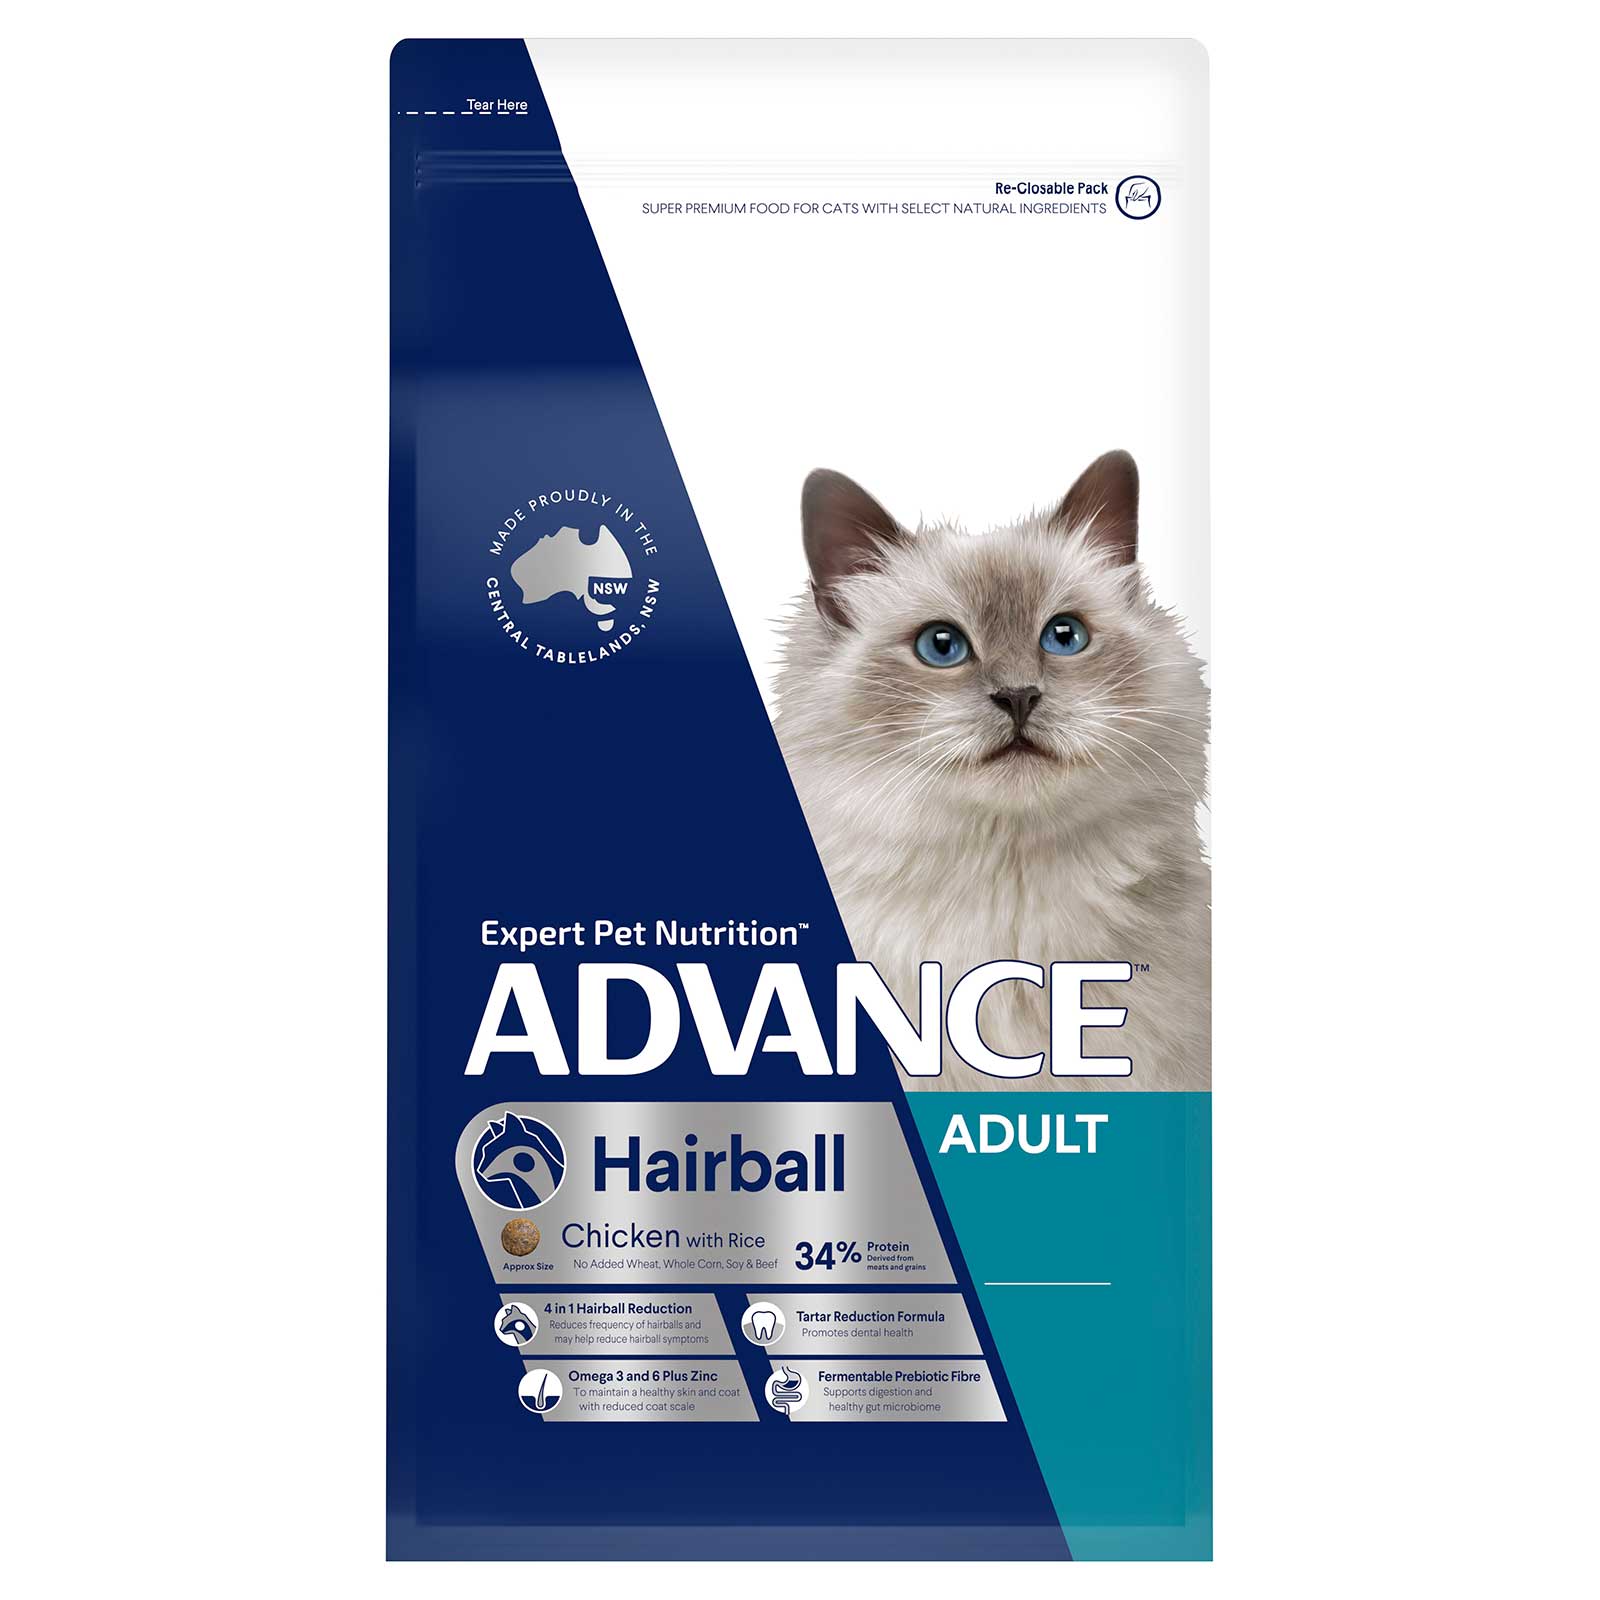 Advance Cat Food Adult Hairball Chicken with Rice